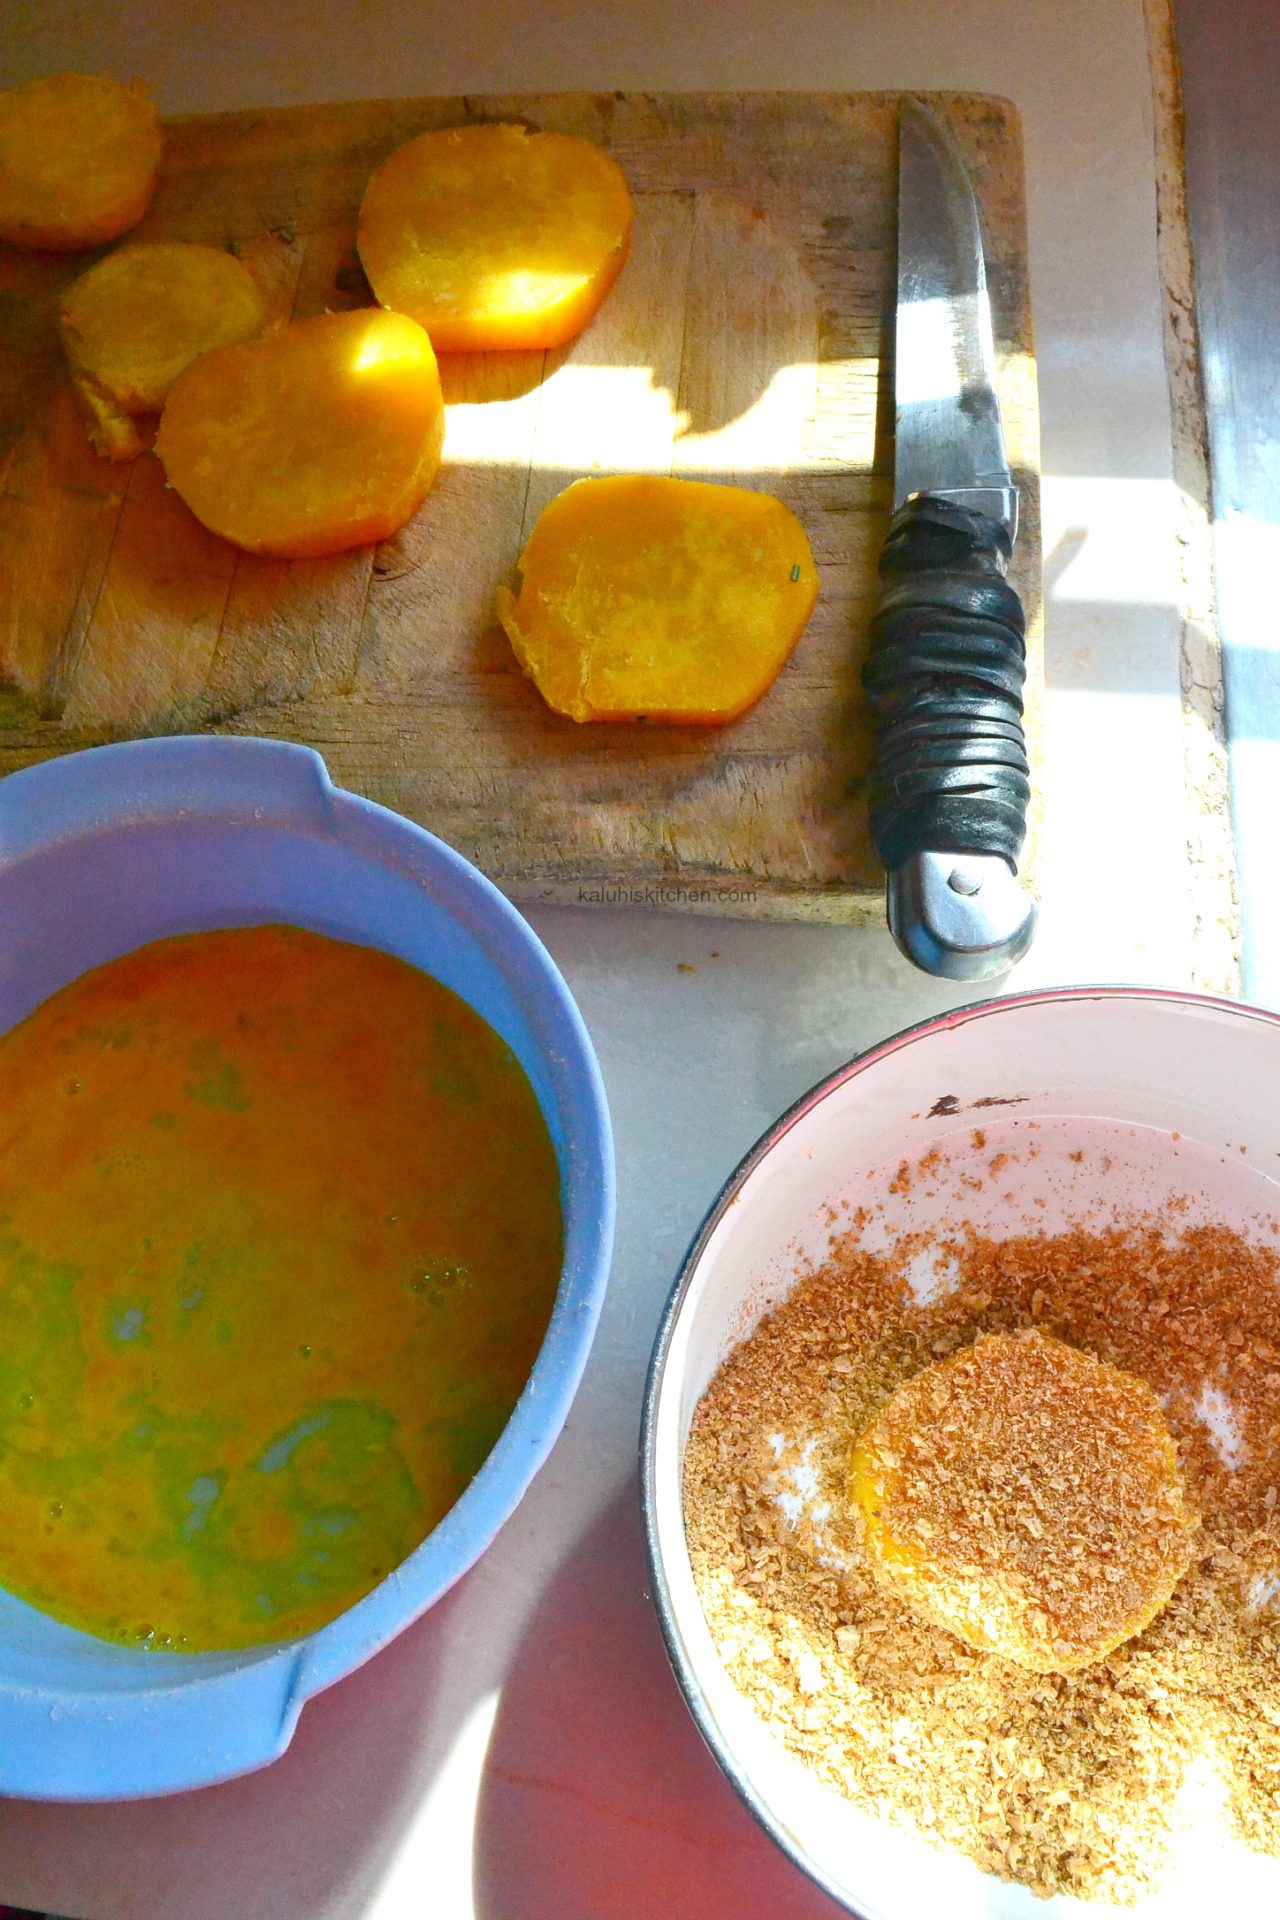 to coat your sweet potatoes, dip them in the egg, then dredge them in the weetabix crumbs then set aside. The egg acts as glue_kaluhiskitchen.com